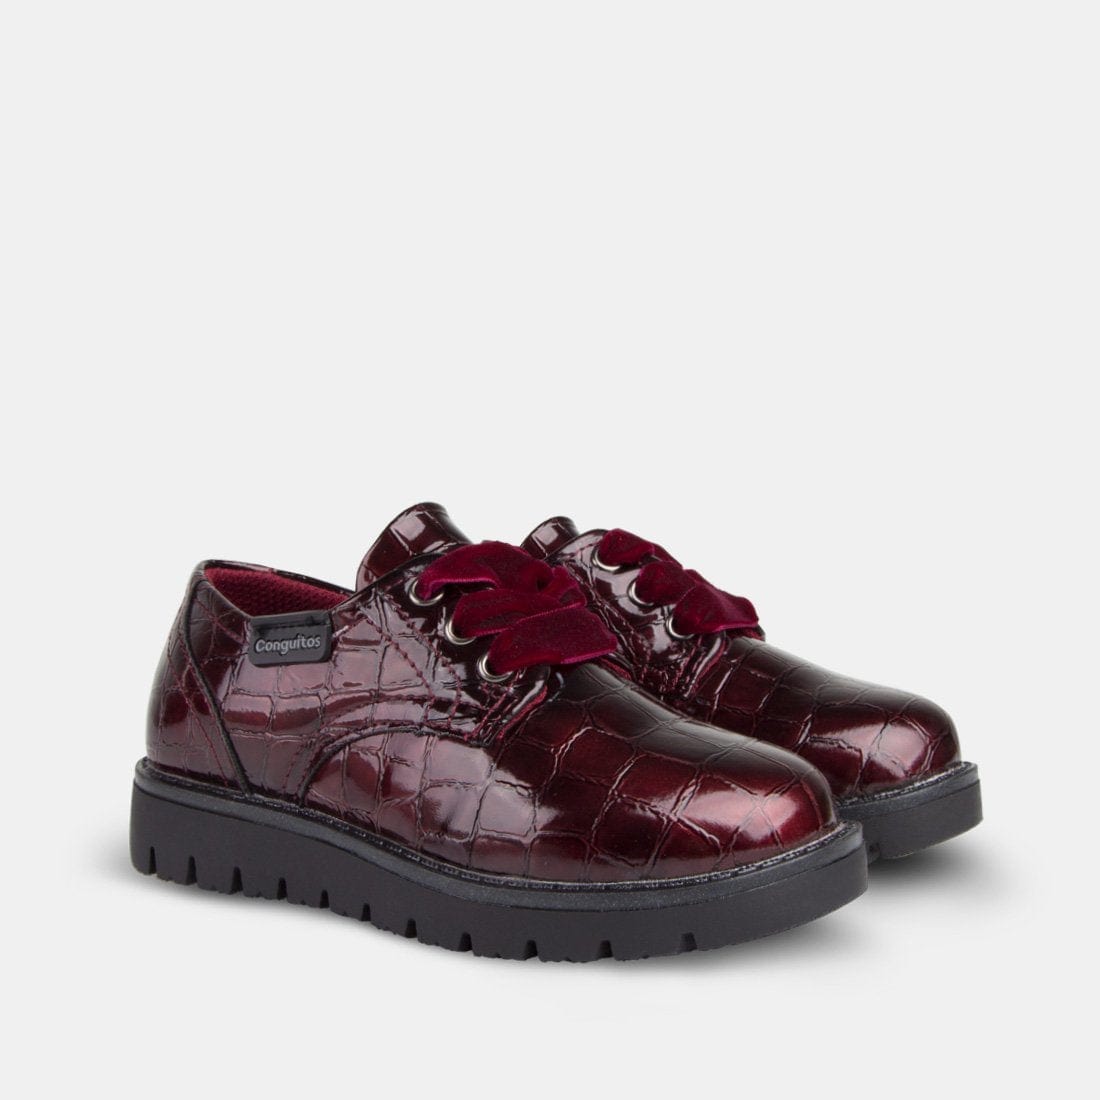 CONGUITOS Shoes Girl's Wine Patent Leather Shoes